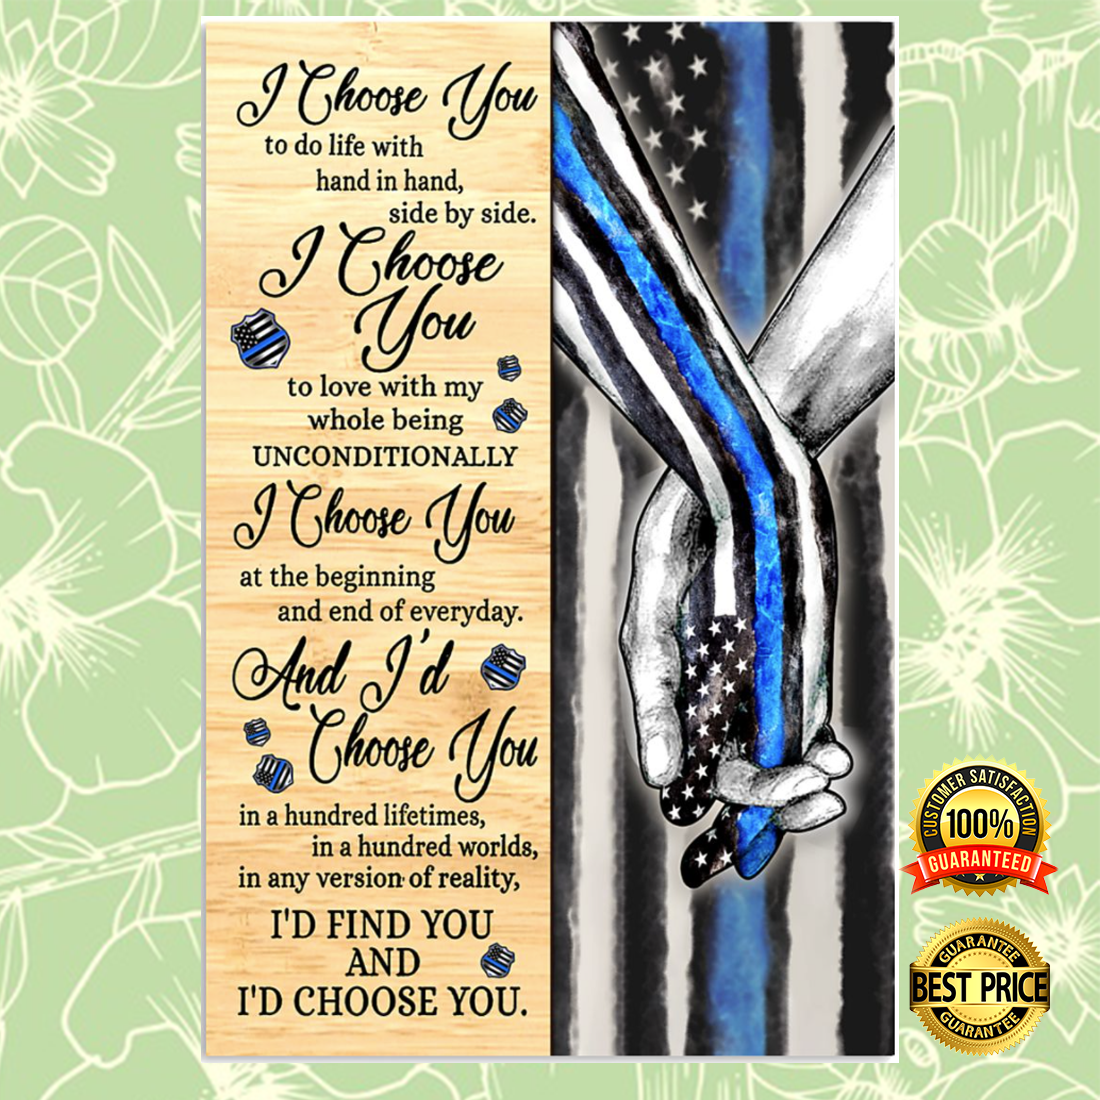 Police i choose you to do life with hand in hand side by side poster 4